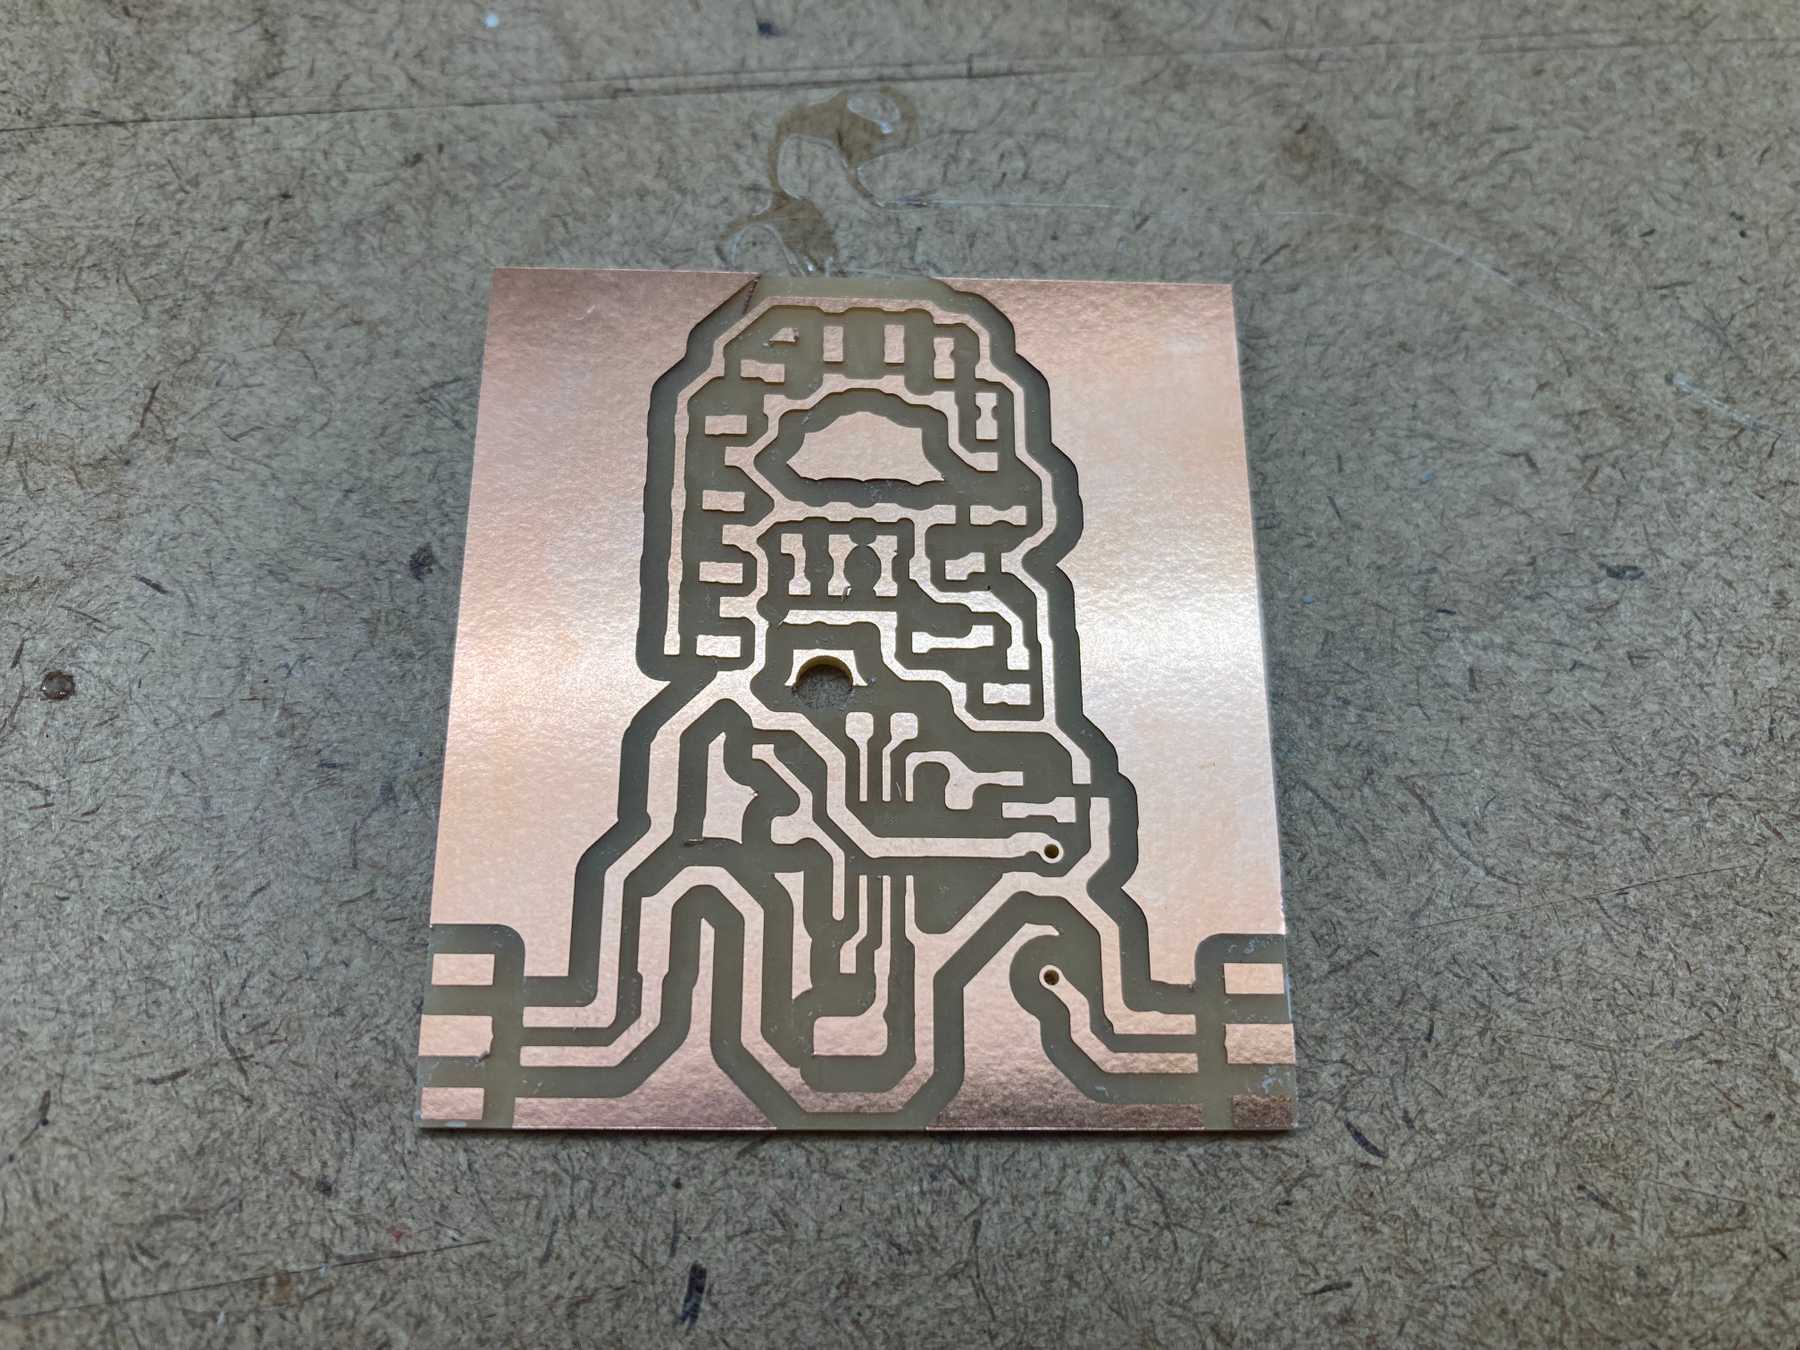 The milled circuit board